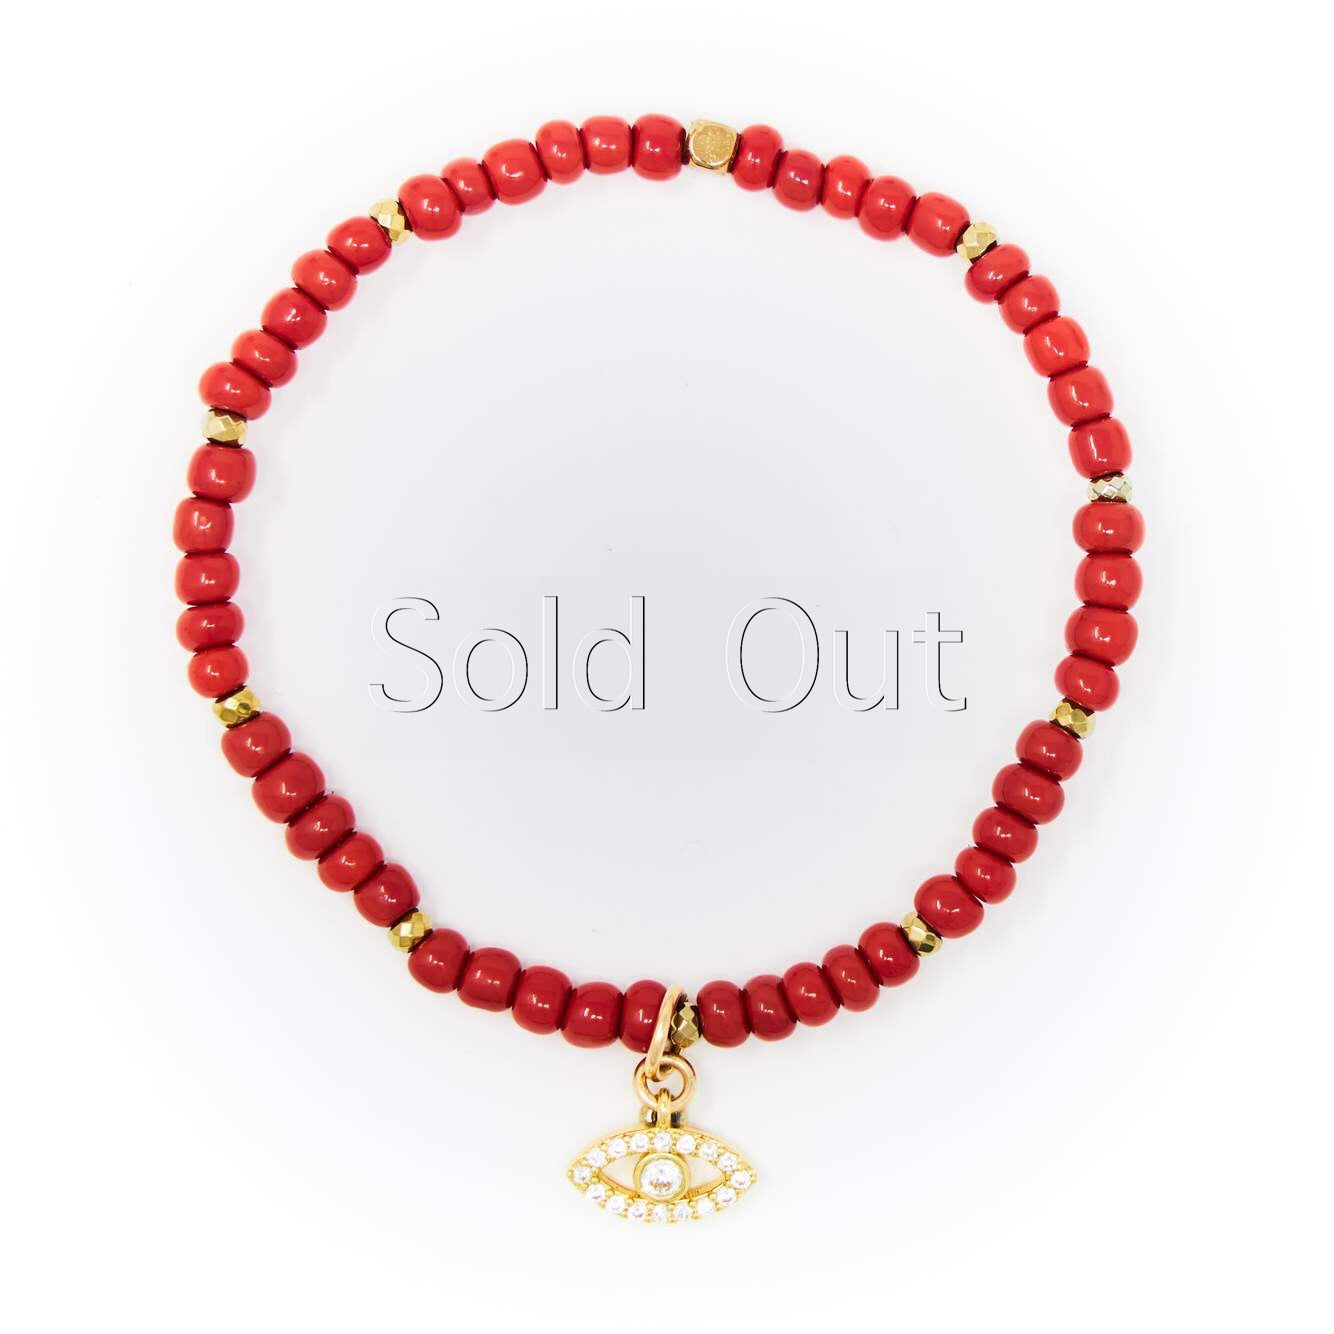 Red Sand Beads with Gold Bracelet, Gold Evil Eye Charm with Clear Zirconia